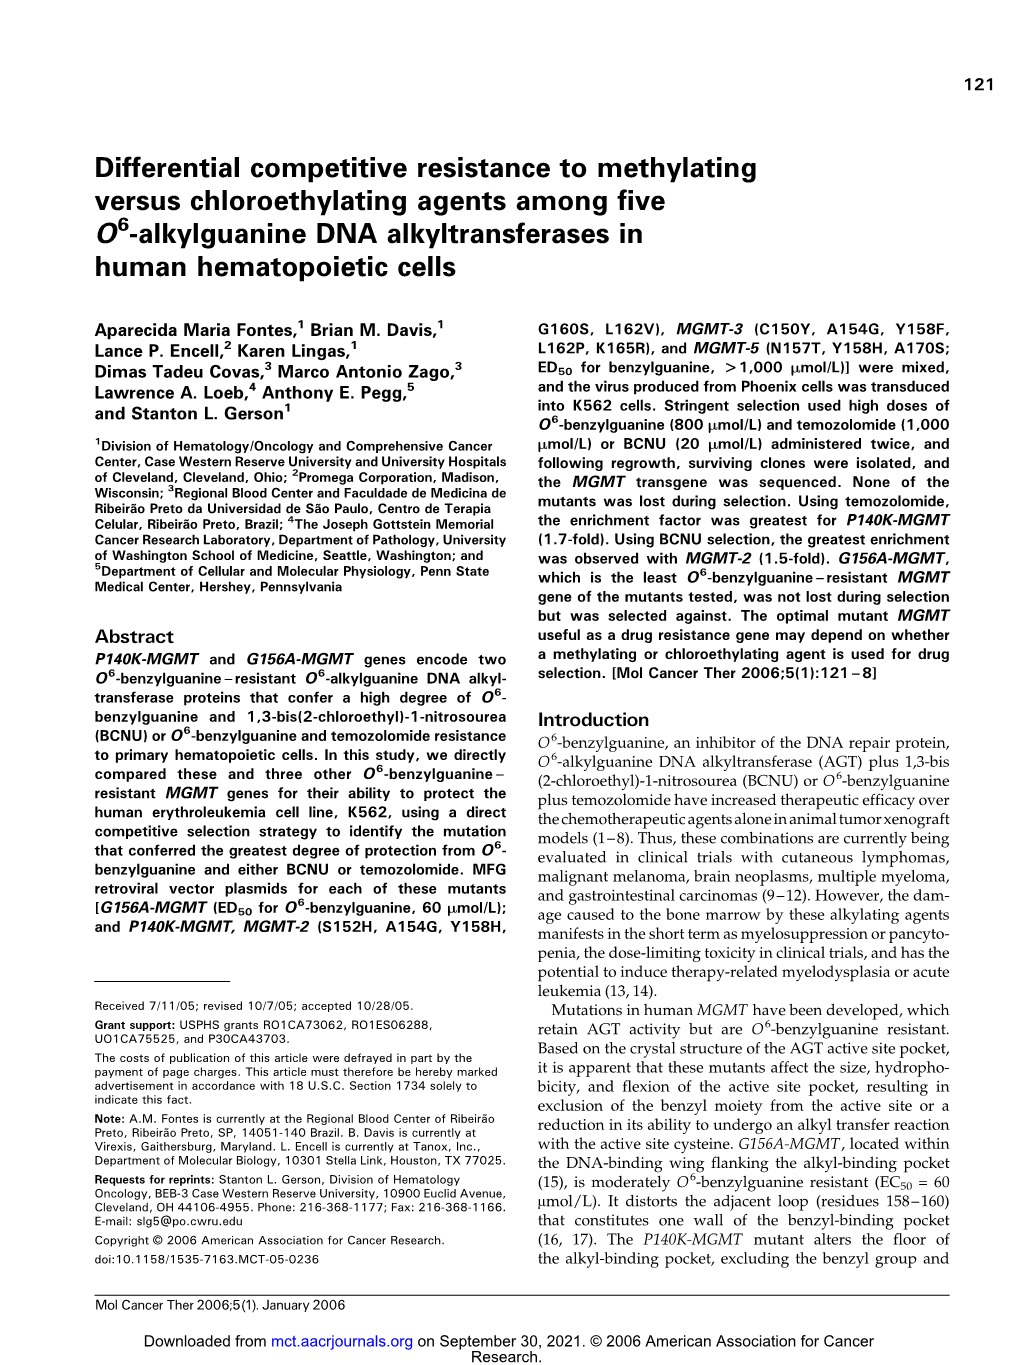 Differential Competitive Resistance to Methylating Versus Chloroethylating Agents Among Five O6-Alkylguanine DNA Alkyltransferases in Human Hematopoietic Cells